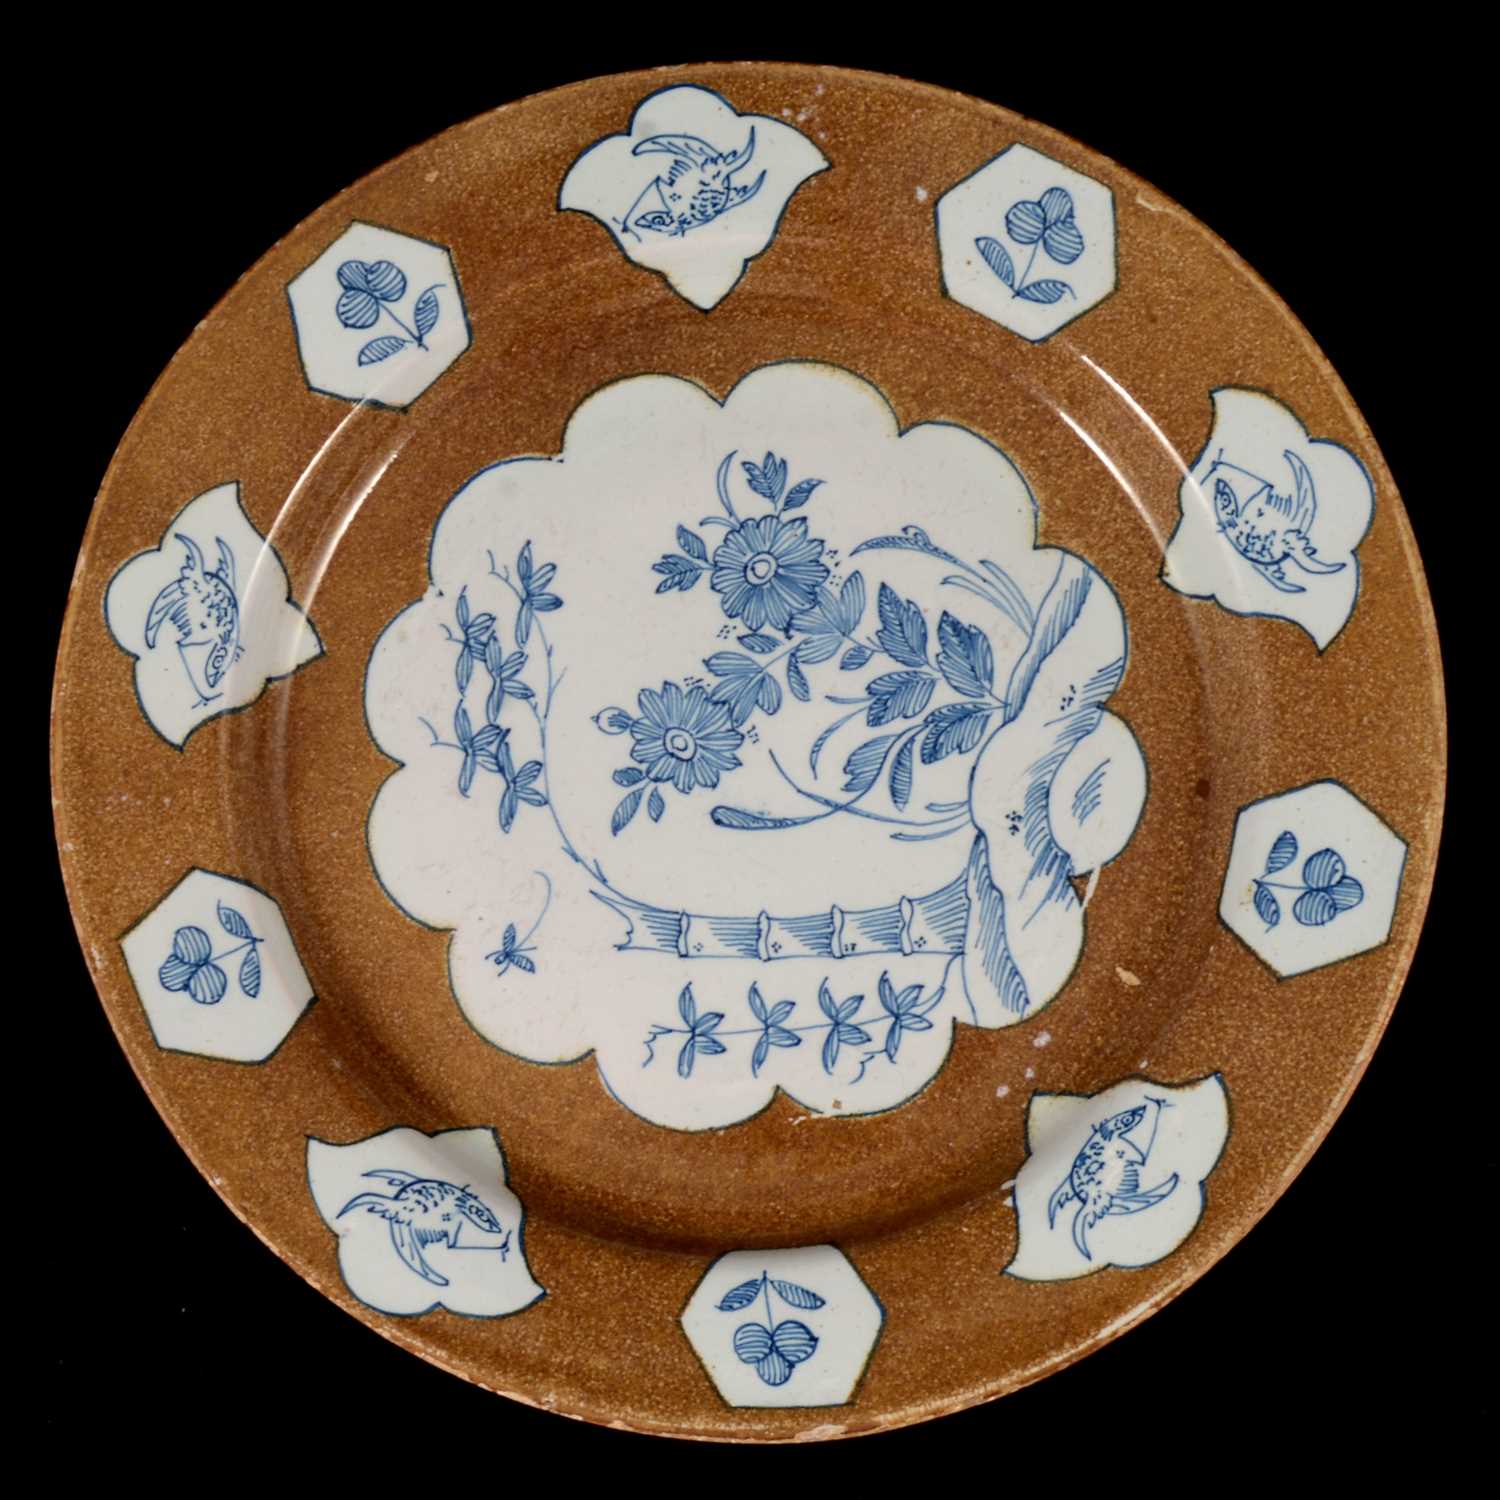 Lot 78 - A large English delft plate, probably Lambeth, mid 18th century